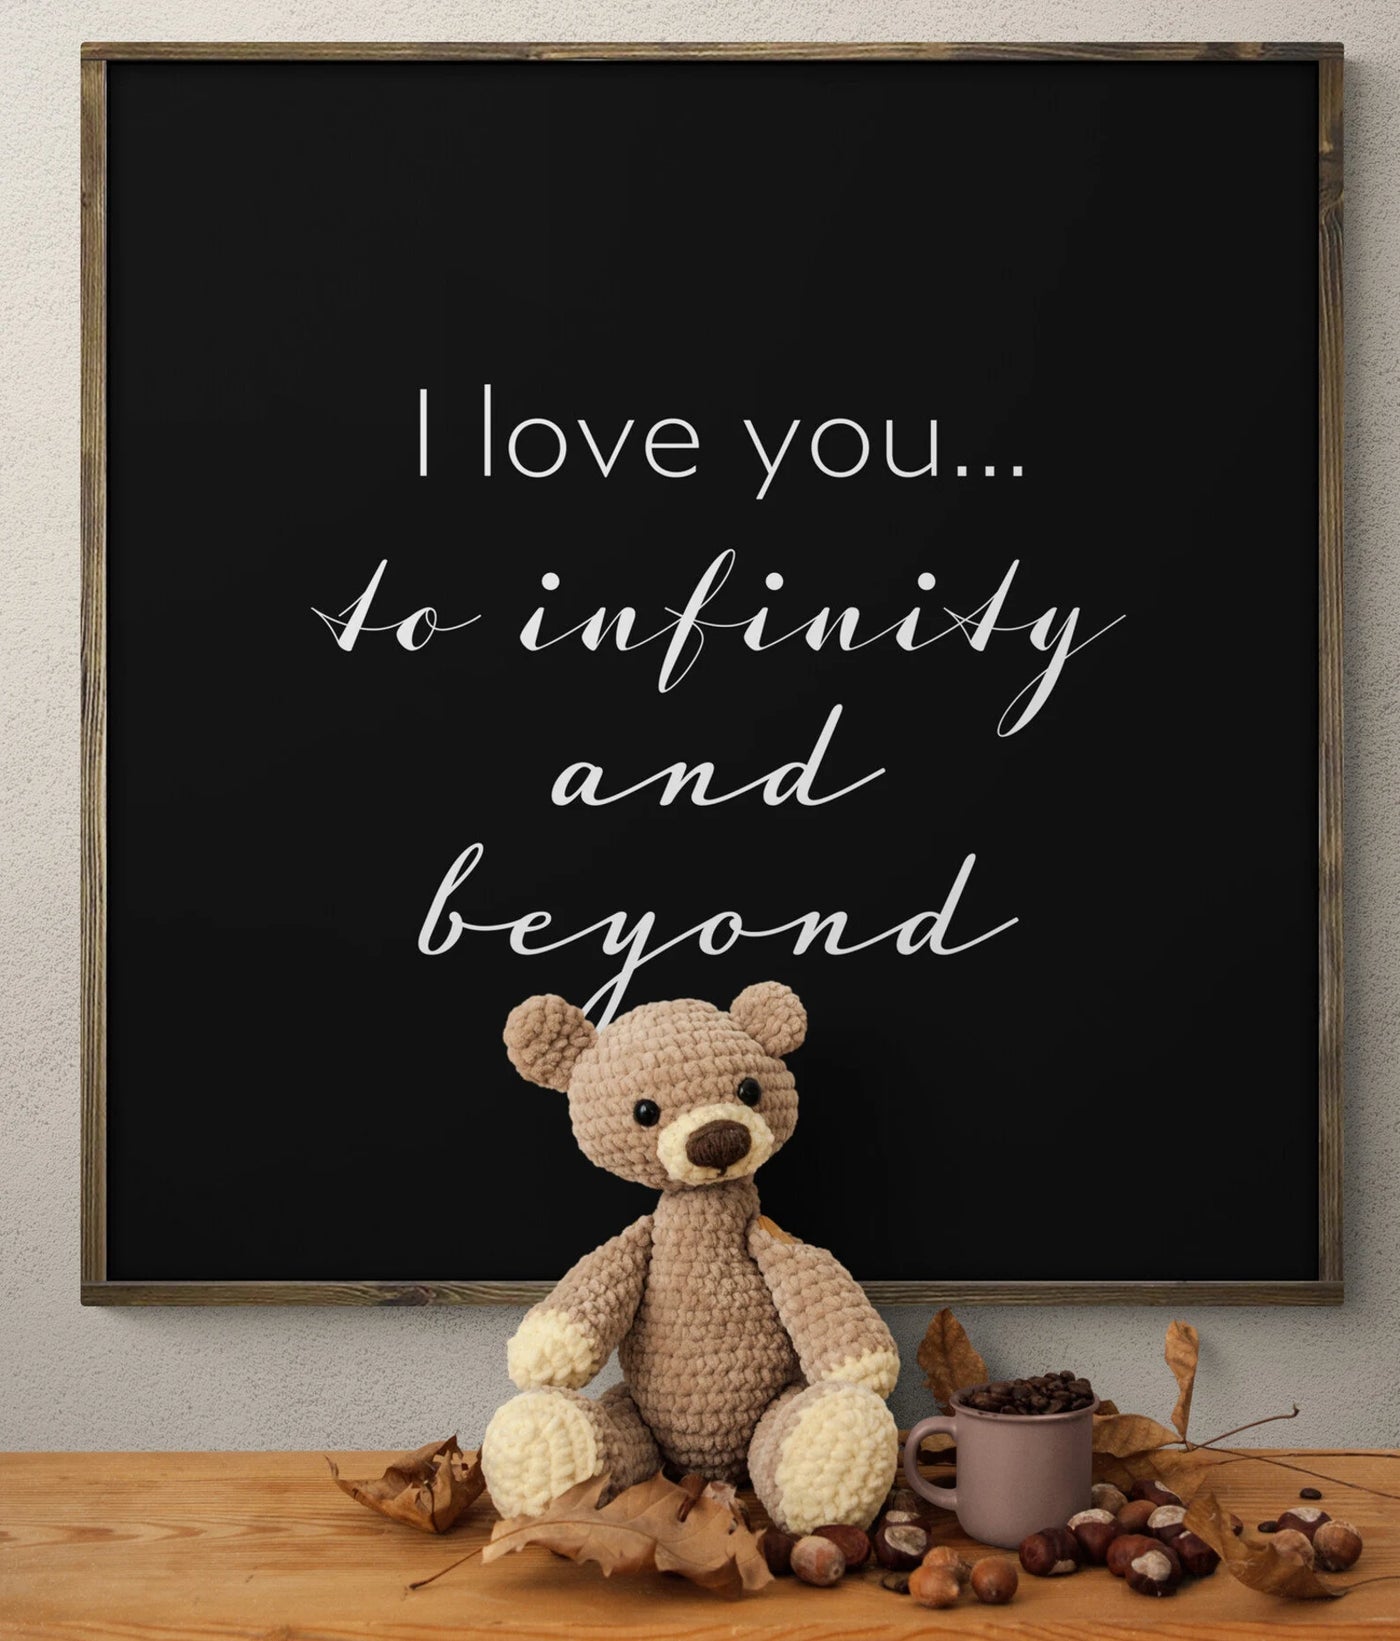 I love you to Infinity and Beyond